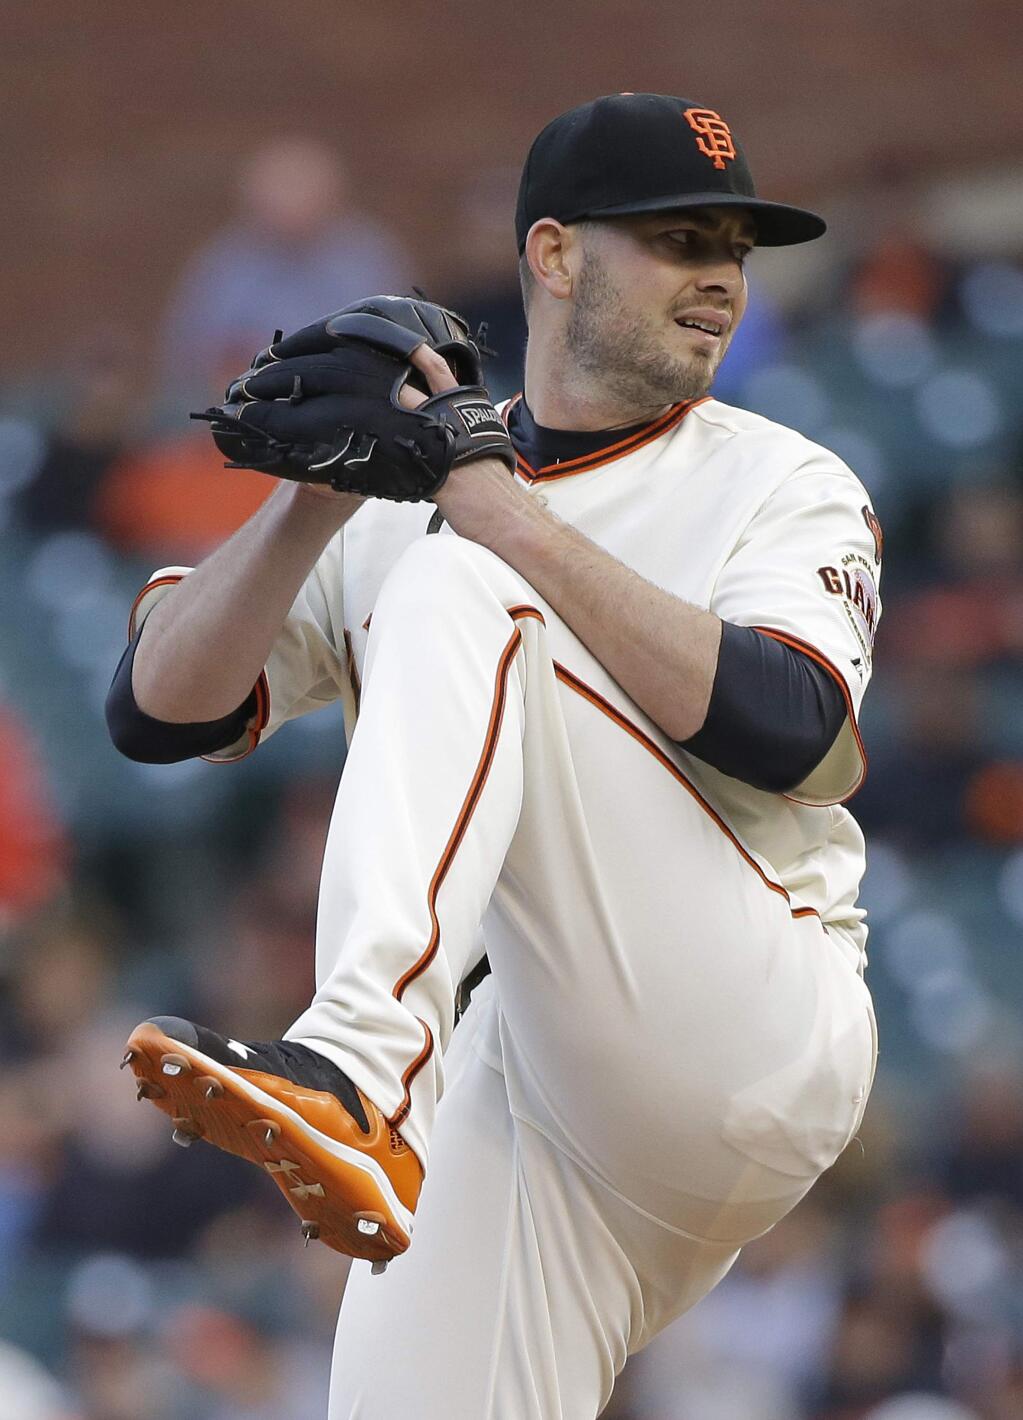 San Francisco Giants starting pitcher Chris Heston throws against the Atlanta Braves in the first inning of their baseball game Thursday, May 28, 2015, in San Francisco. (AP Photo/Eric Risberg)